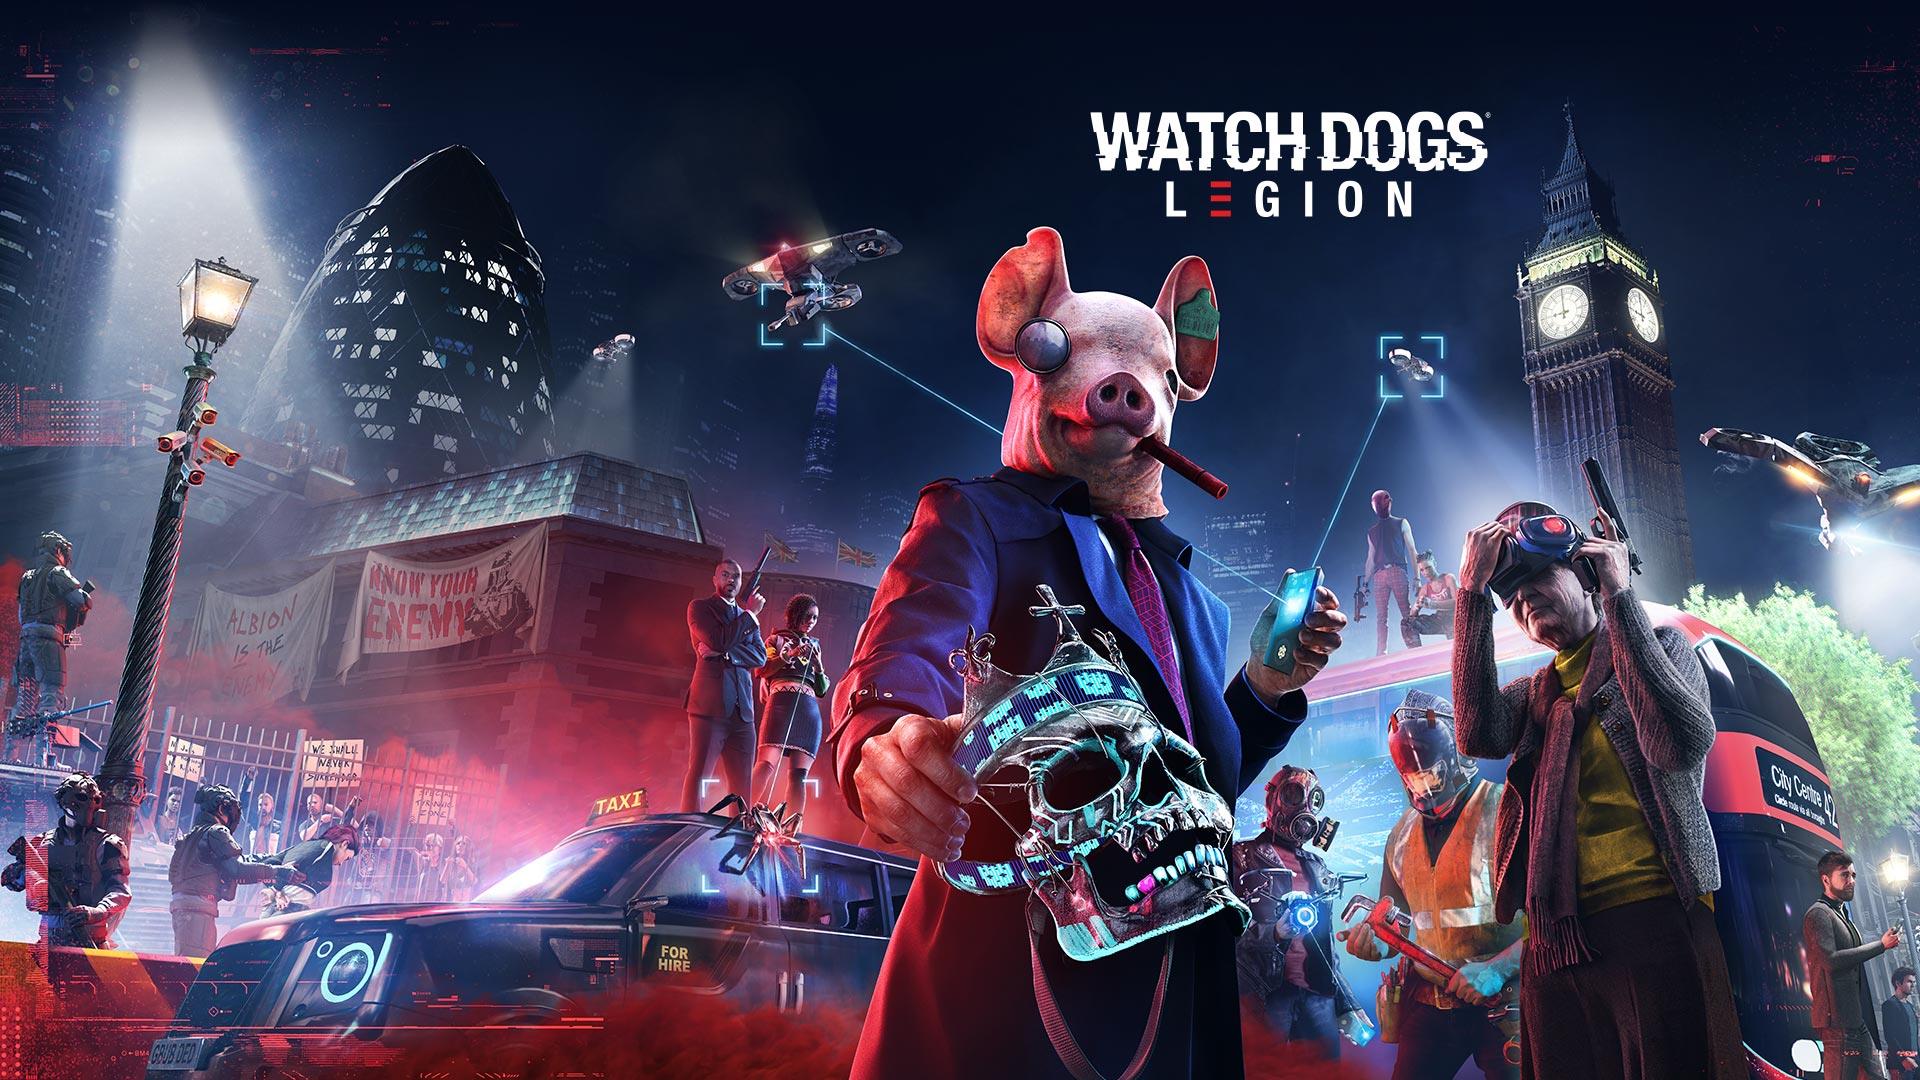 Play Watch Dogs: Legion for Free from September 3-5